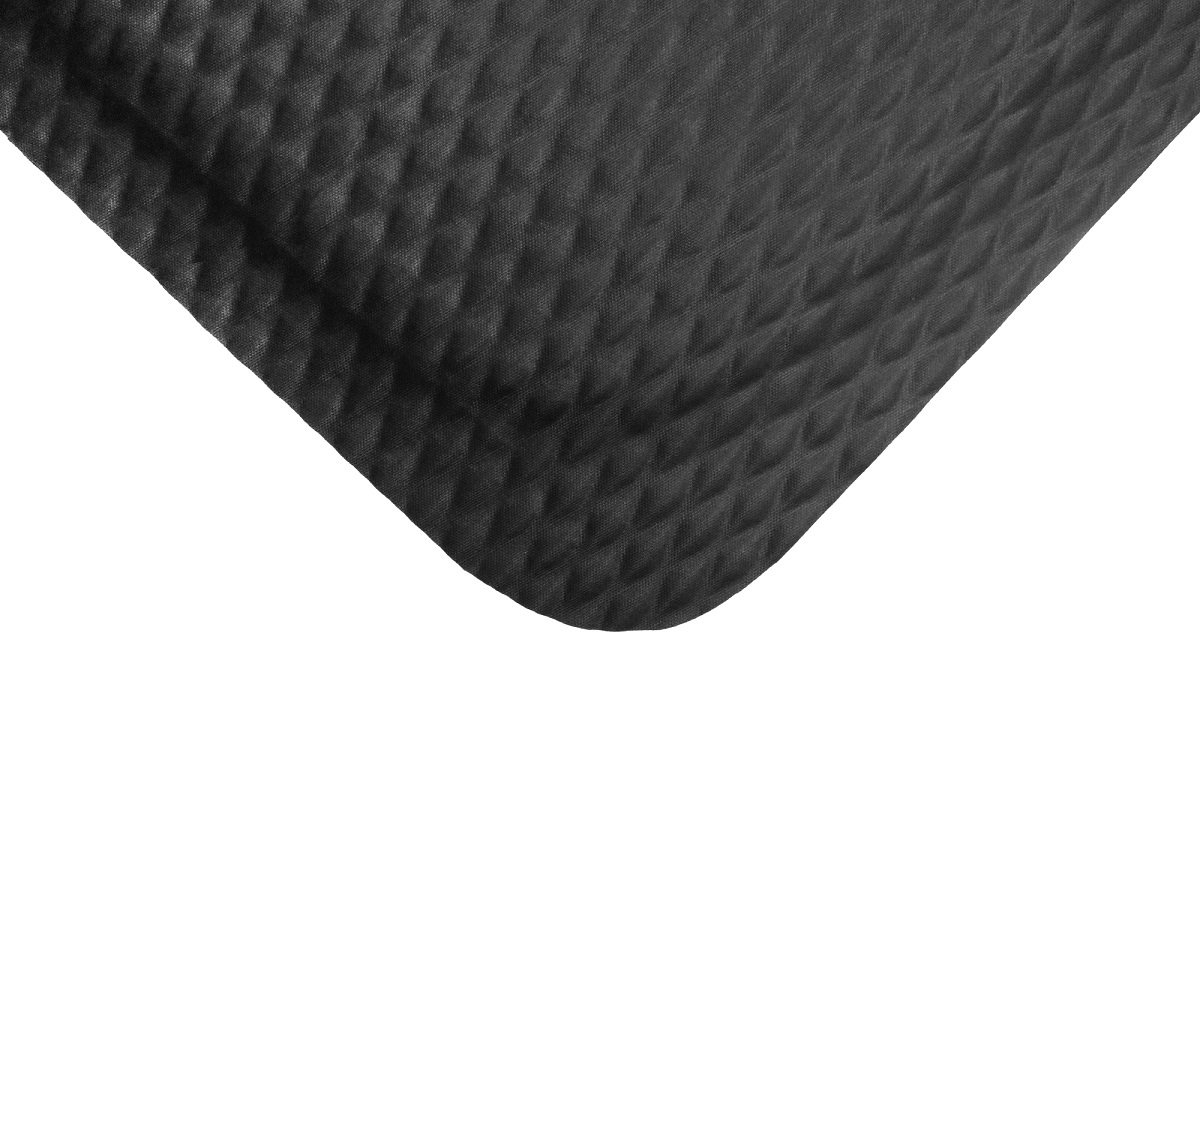 Supreme Diamond Foot™ Anti-Fatigue Floor Mat by Mat Pro - Commercial &  Industrial Matting in Solid Black or Grey